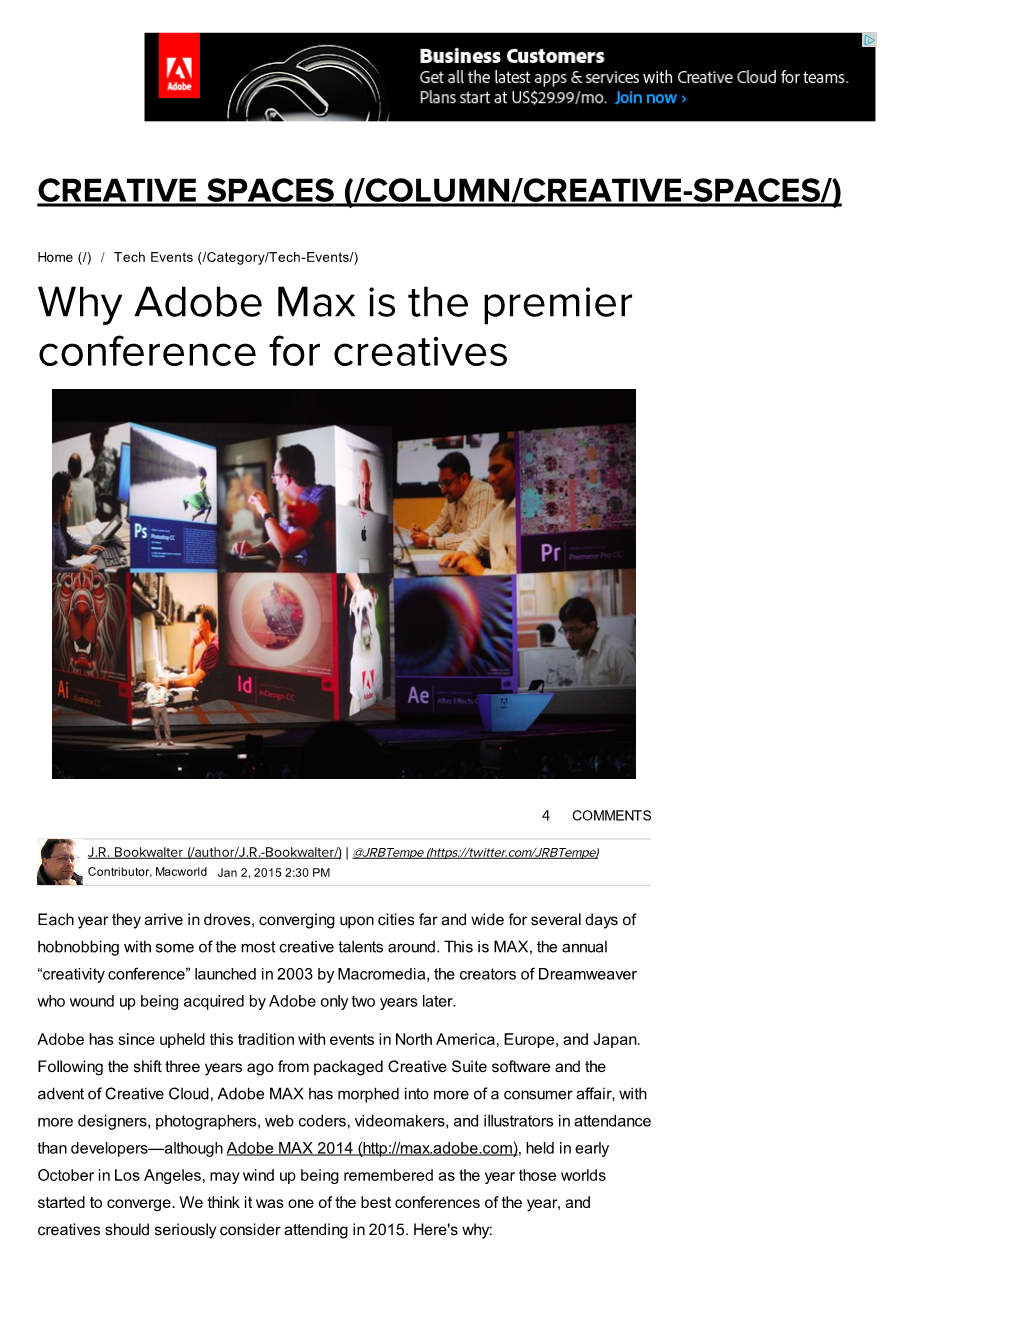 Why Adobe Max Is the Premier Conference for Creatives